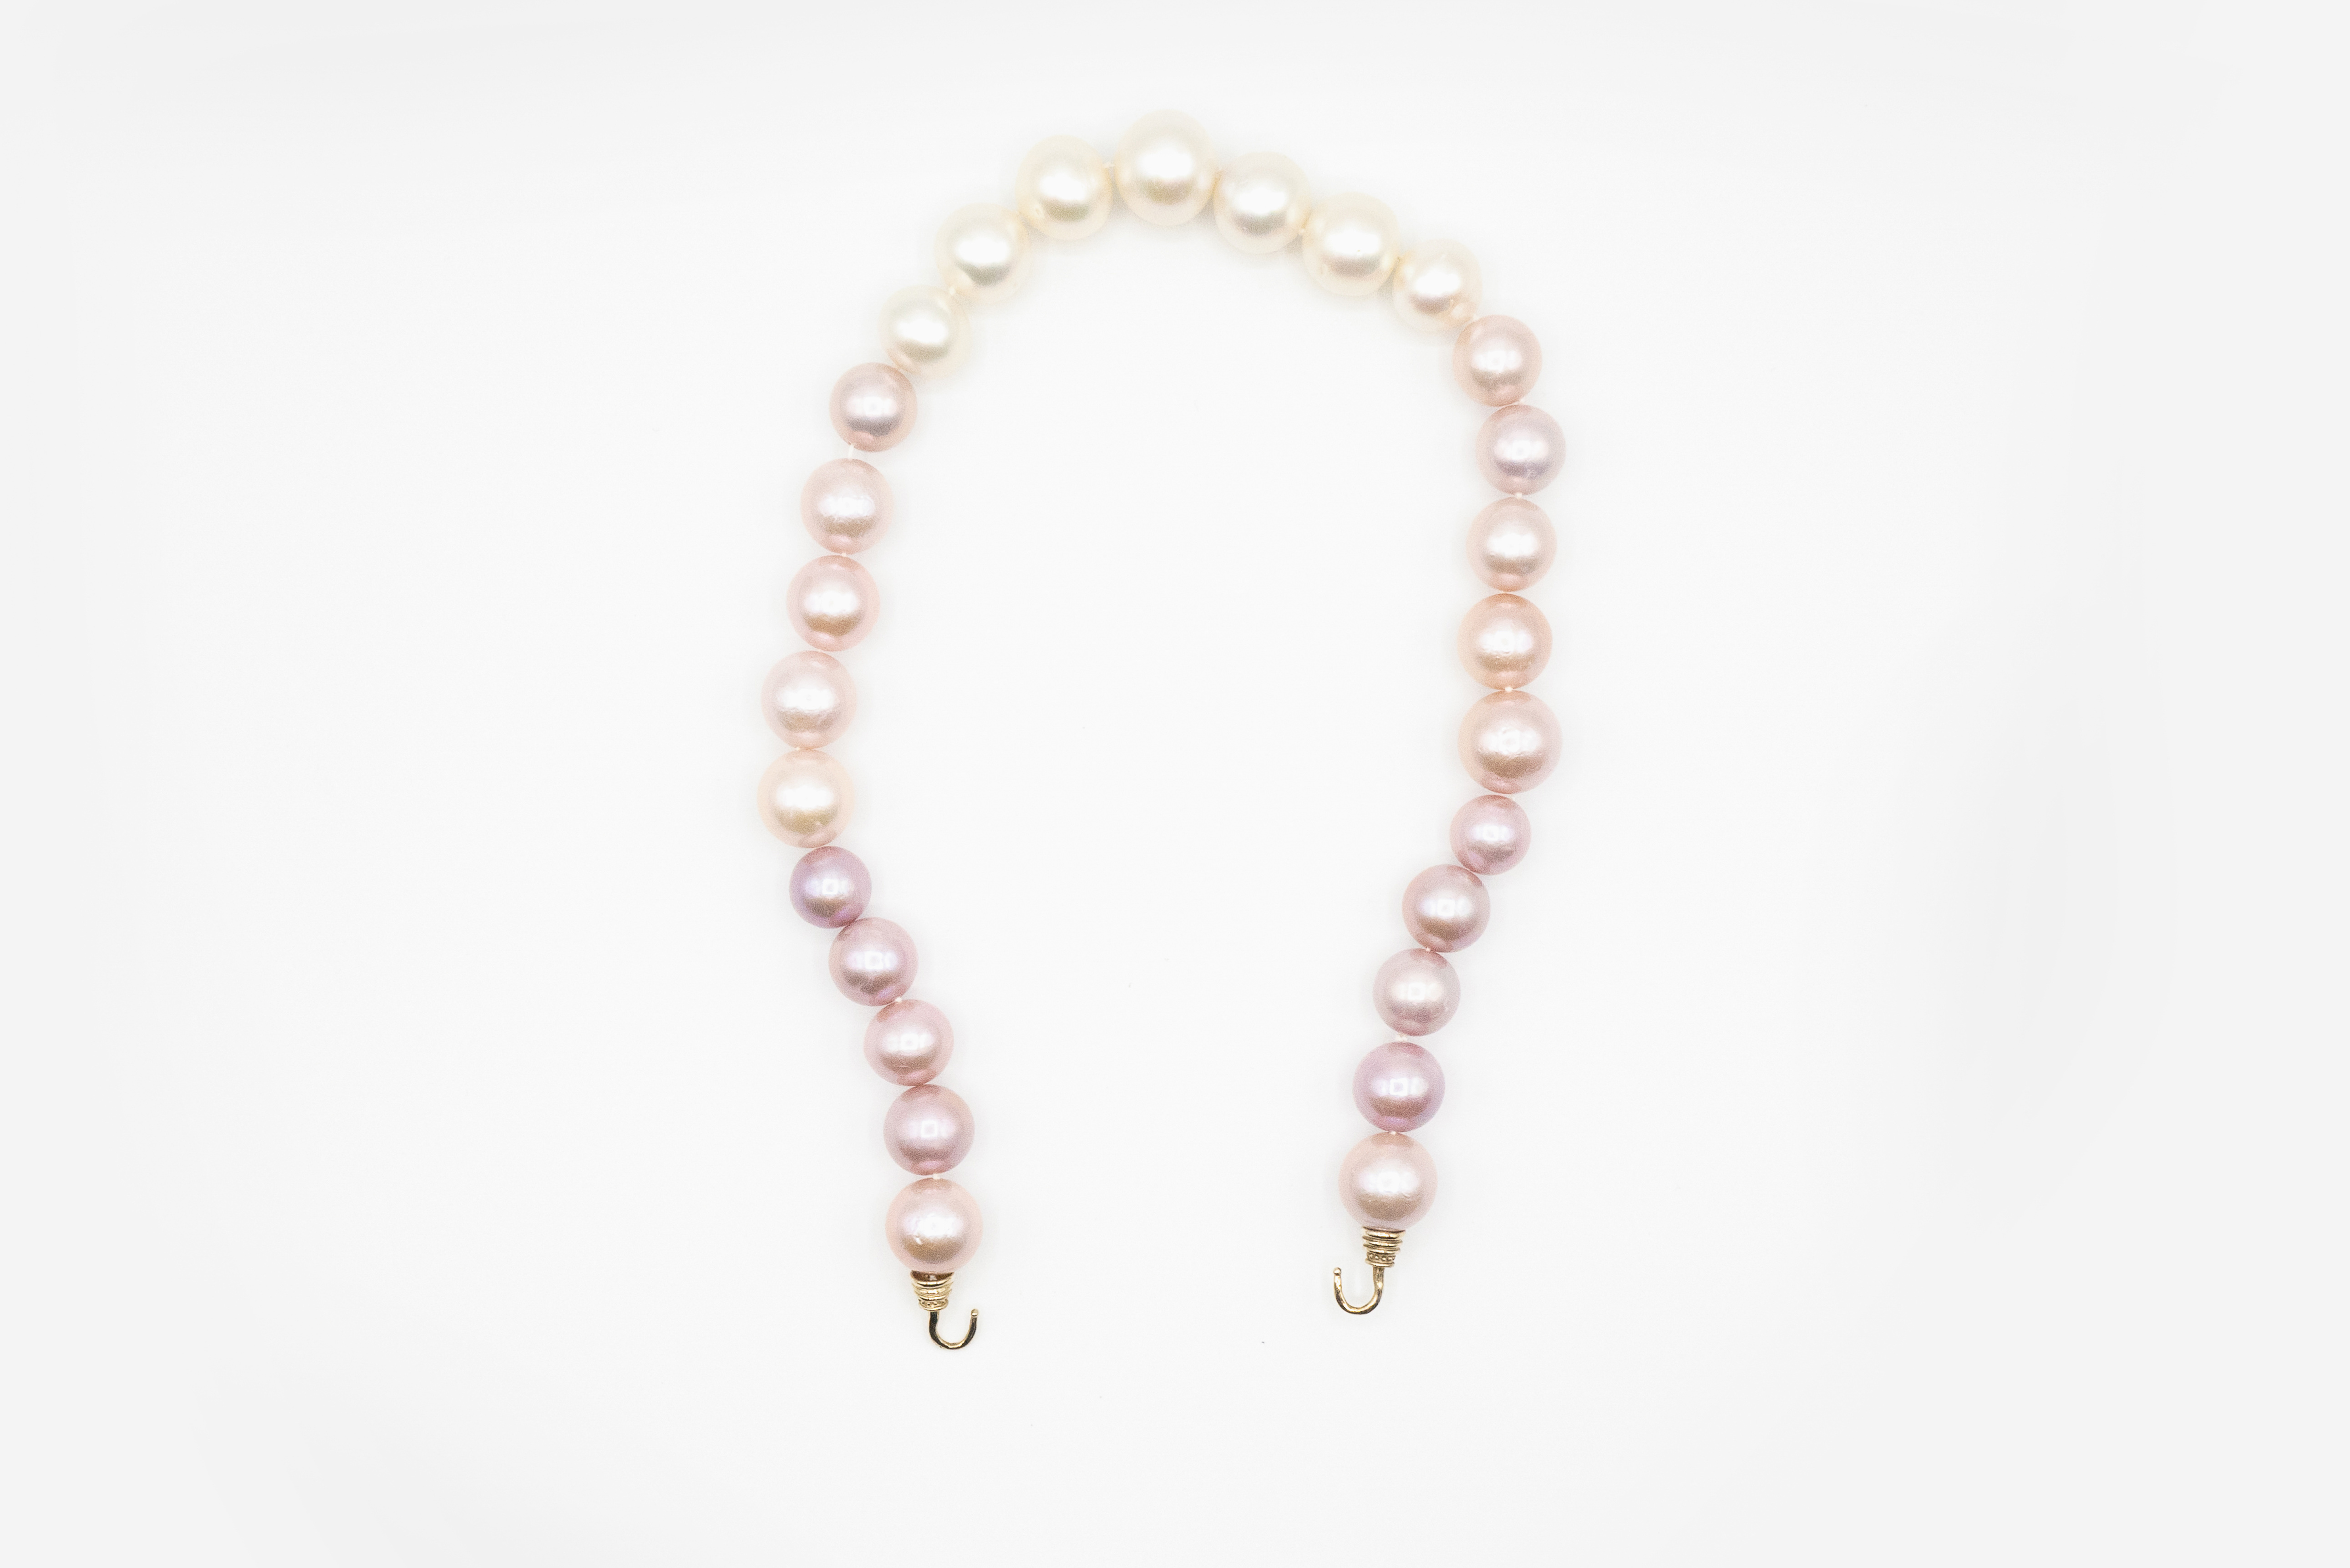 MAB 21-0117 Natural Colored Pink and White South Sea Pearl Strand on 14kw Gold Hooks.